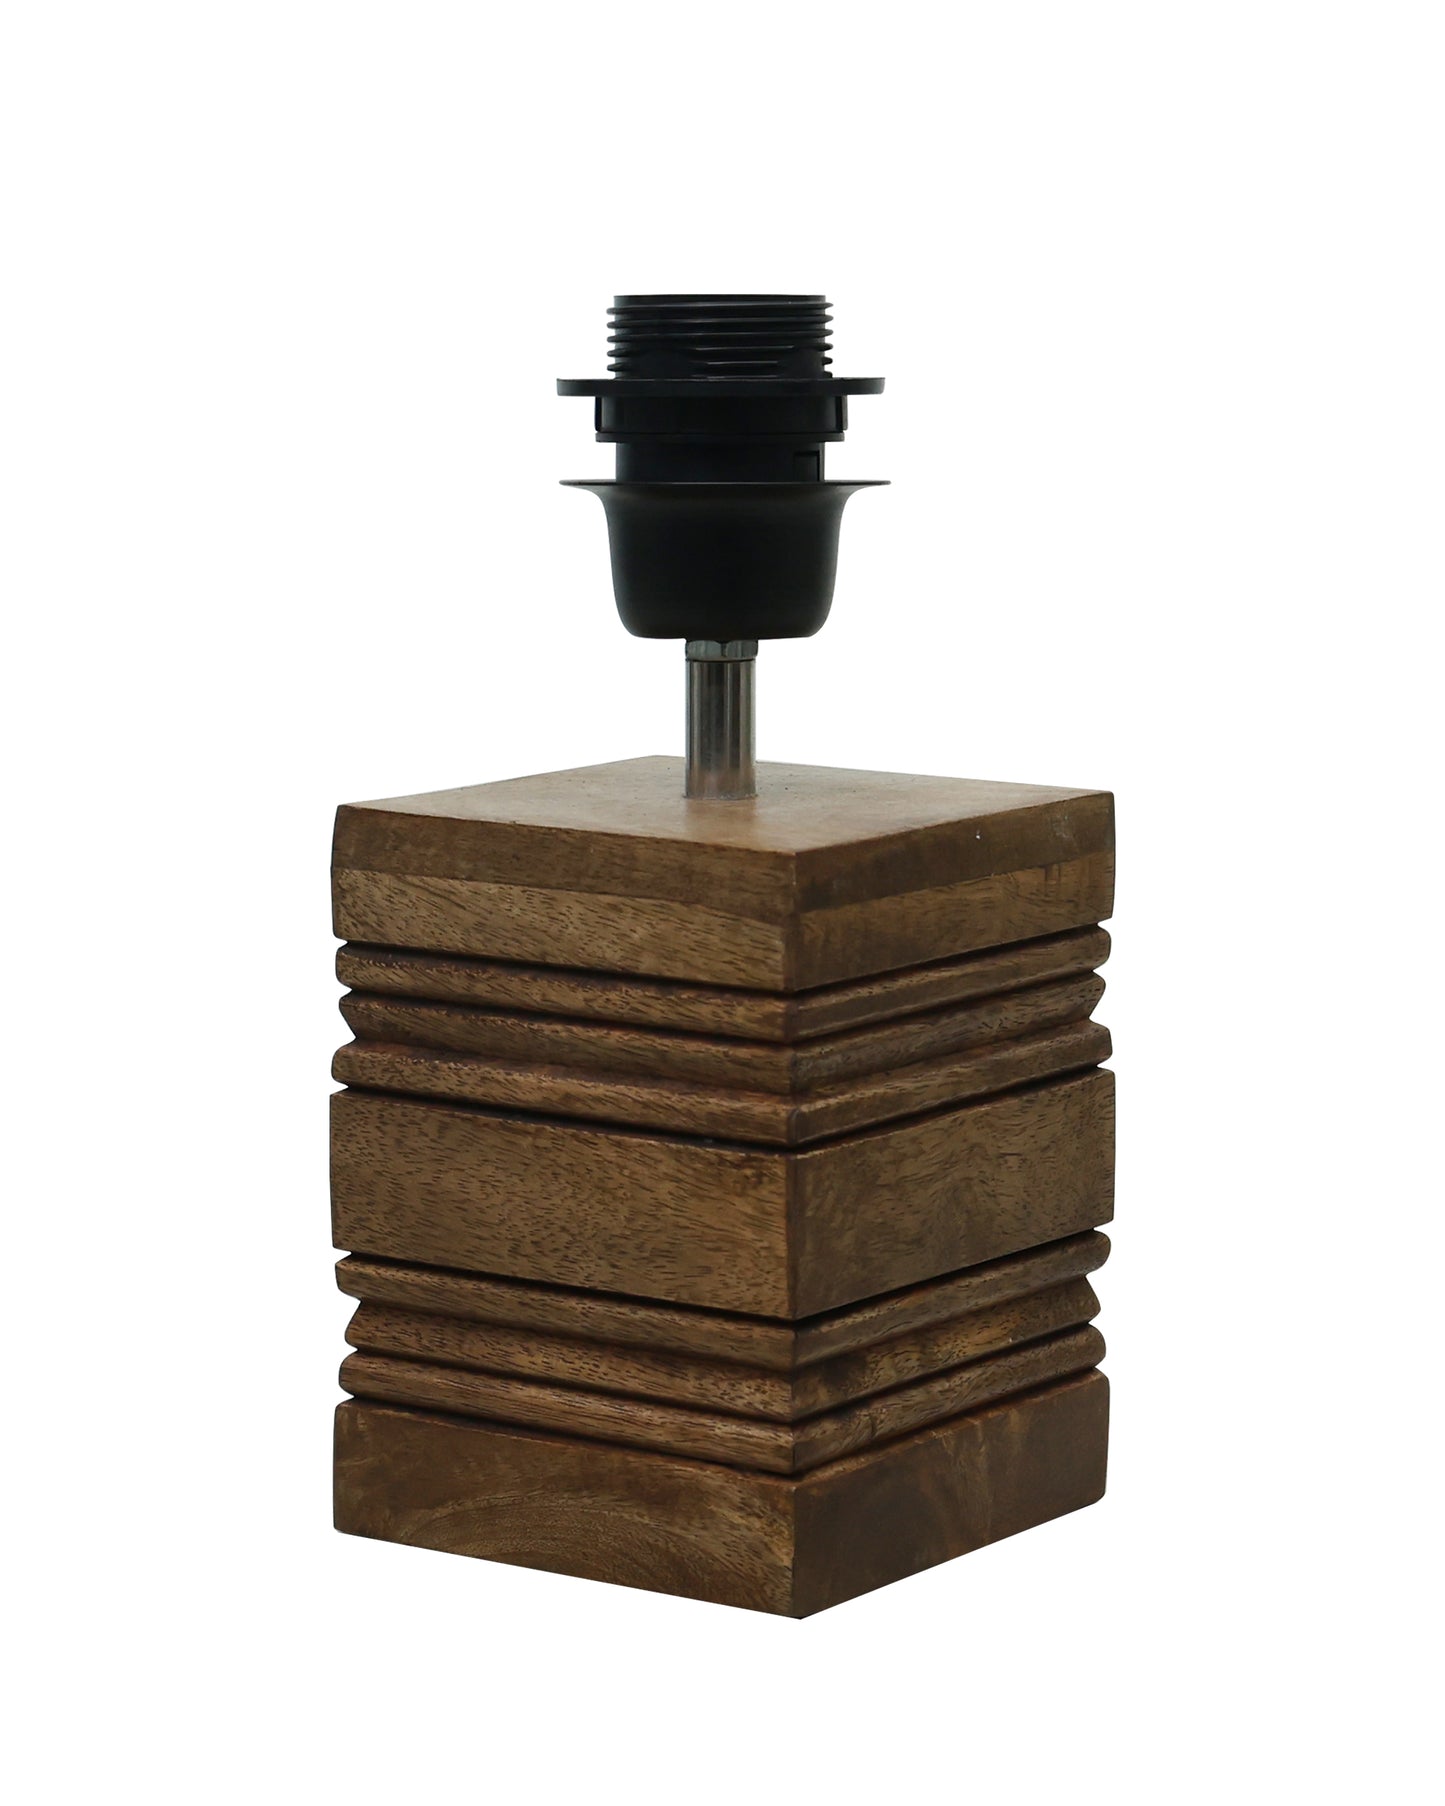 Ribbed Cube Table Lamp, Wooden Base Modern Fabric Lampshade for Home Office Cafe Restaurant, Cone